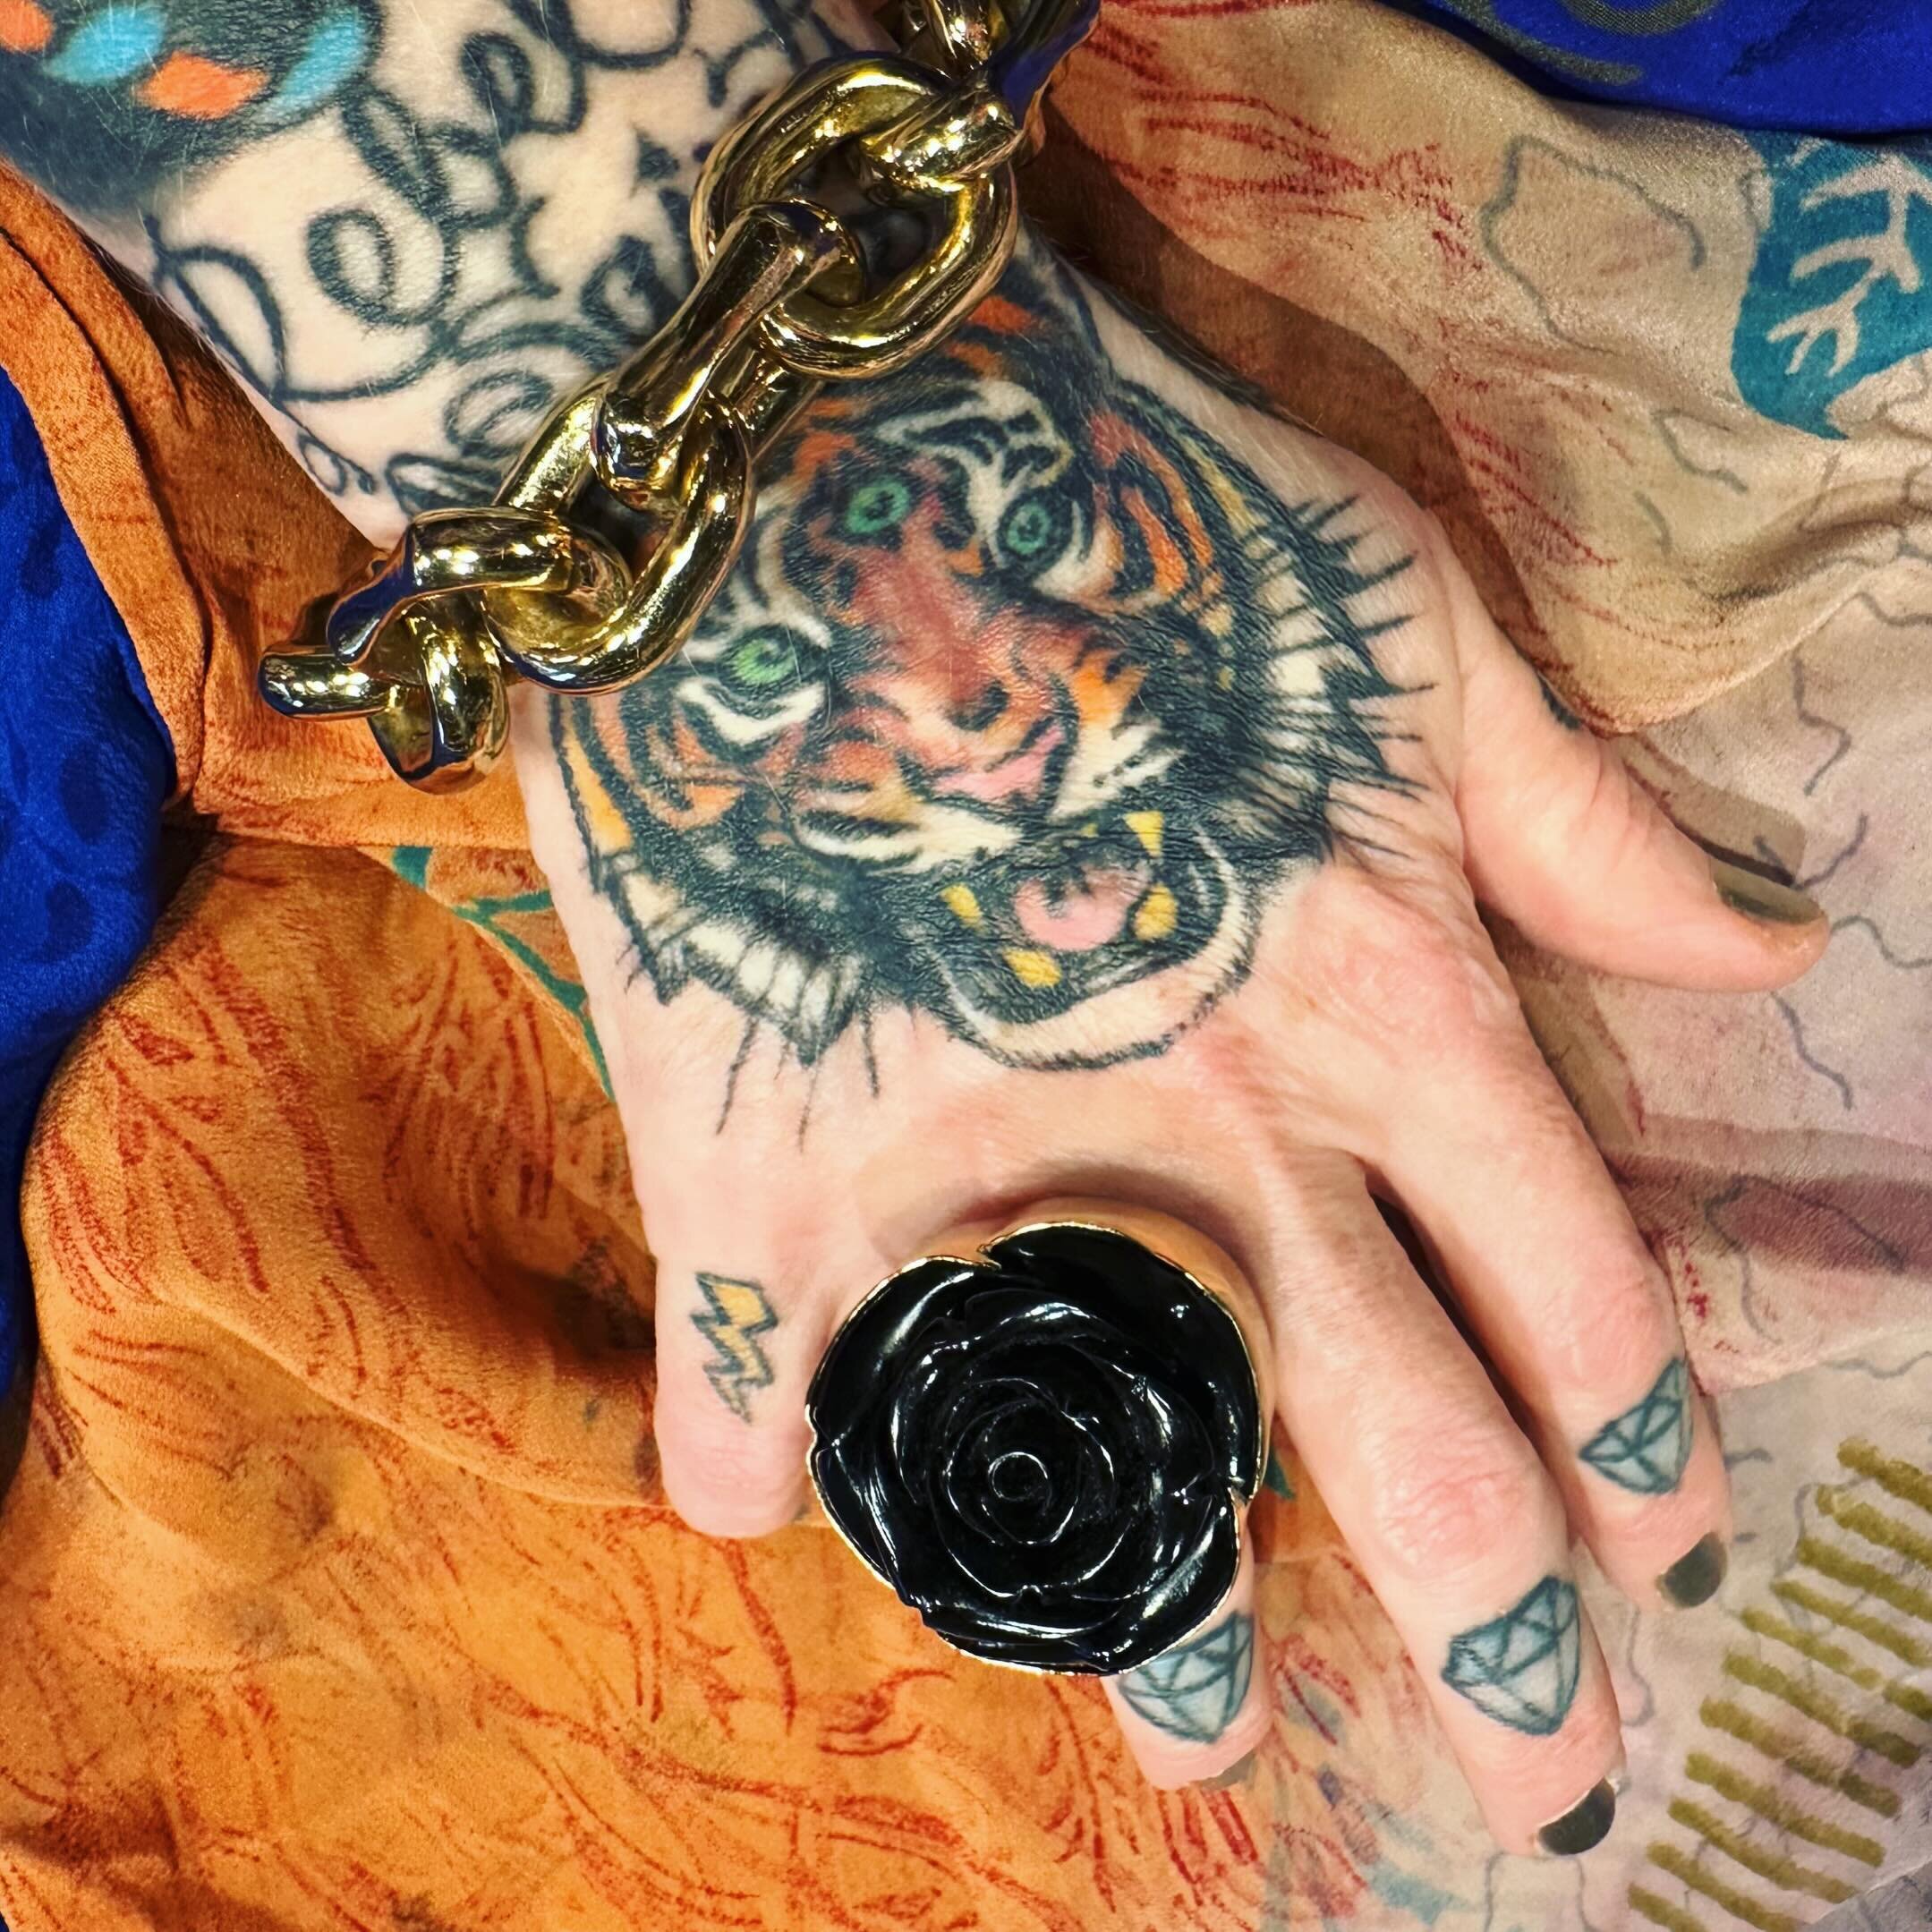 ✨Jewelry for Queens👑✨
&bull;
&bull;
&bull;
✨DM anytime or come by The Vajra 12-6💫 
&bull;
&bull;
&bull;
#thevajra #vajra #thevajraseattle #statementjewelry #jewelryforqueens